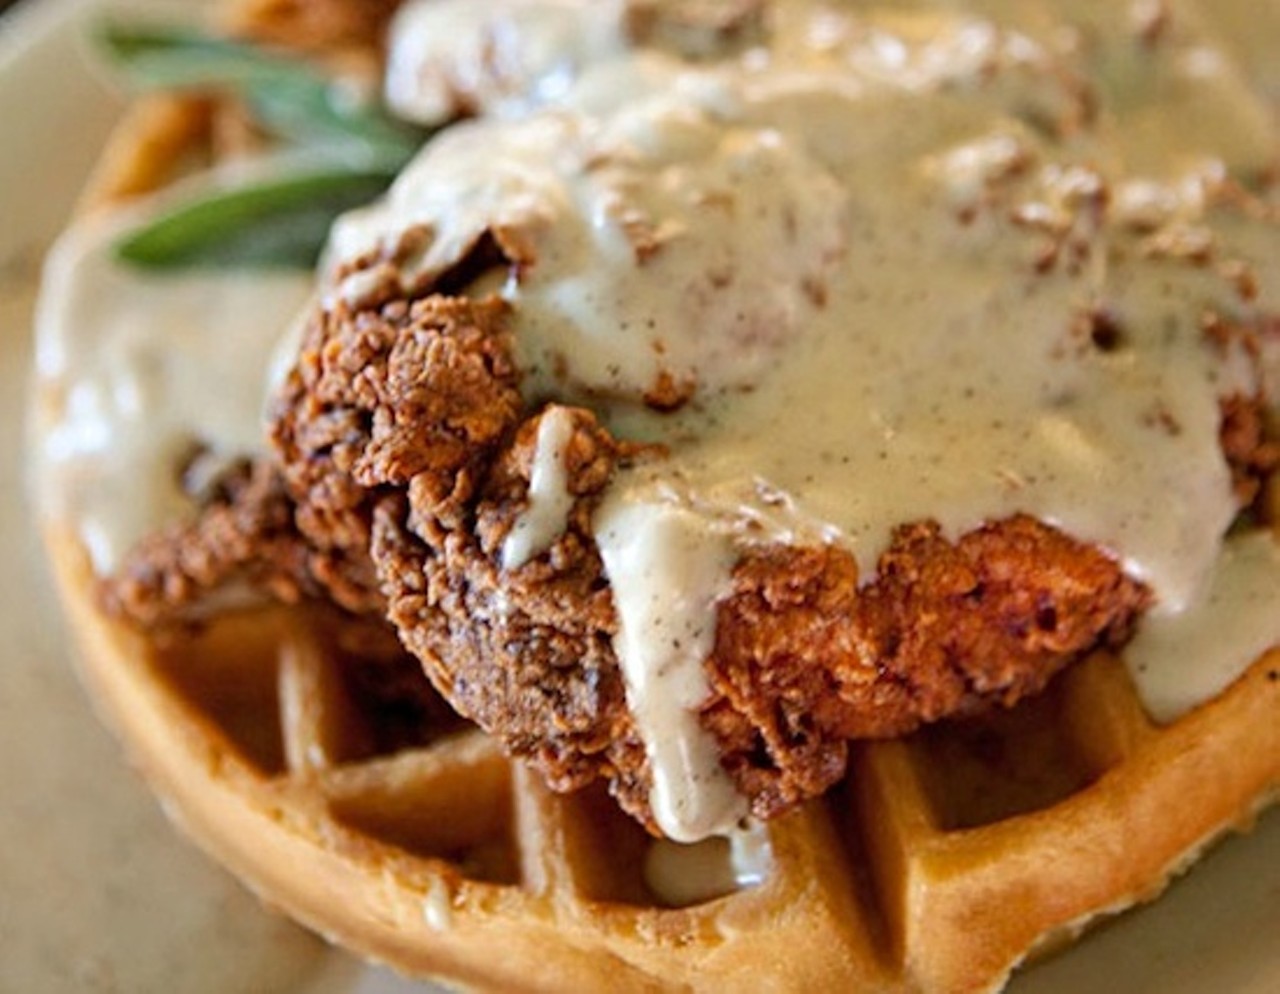 Of course, there's nothing wrong with the more traditional waffle and fried chicken pairing, as offered by Jonathon's Oak Cliff in Dallas, Texas.